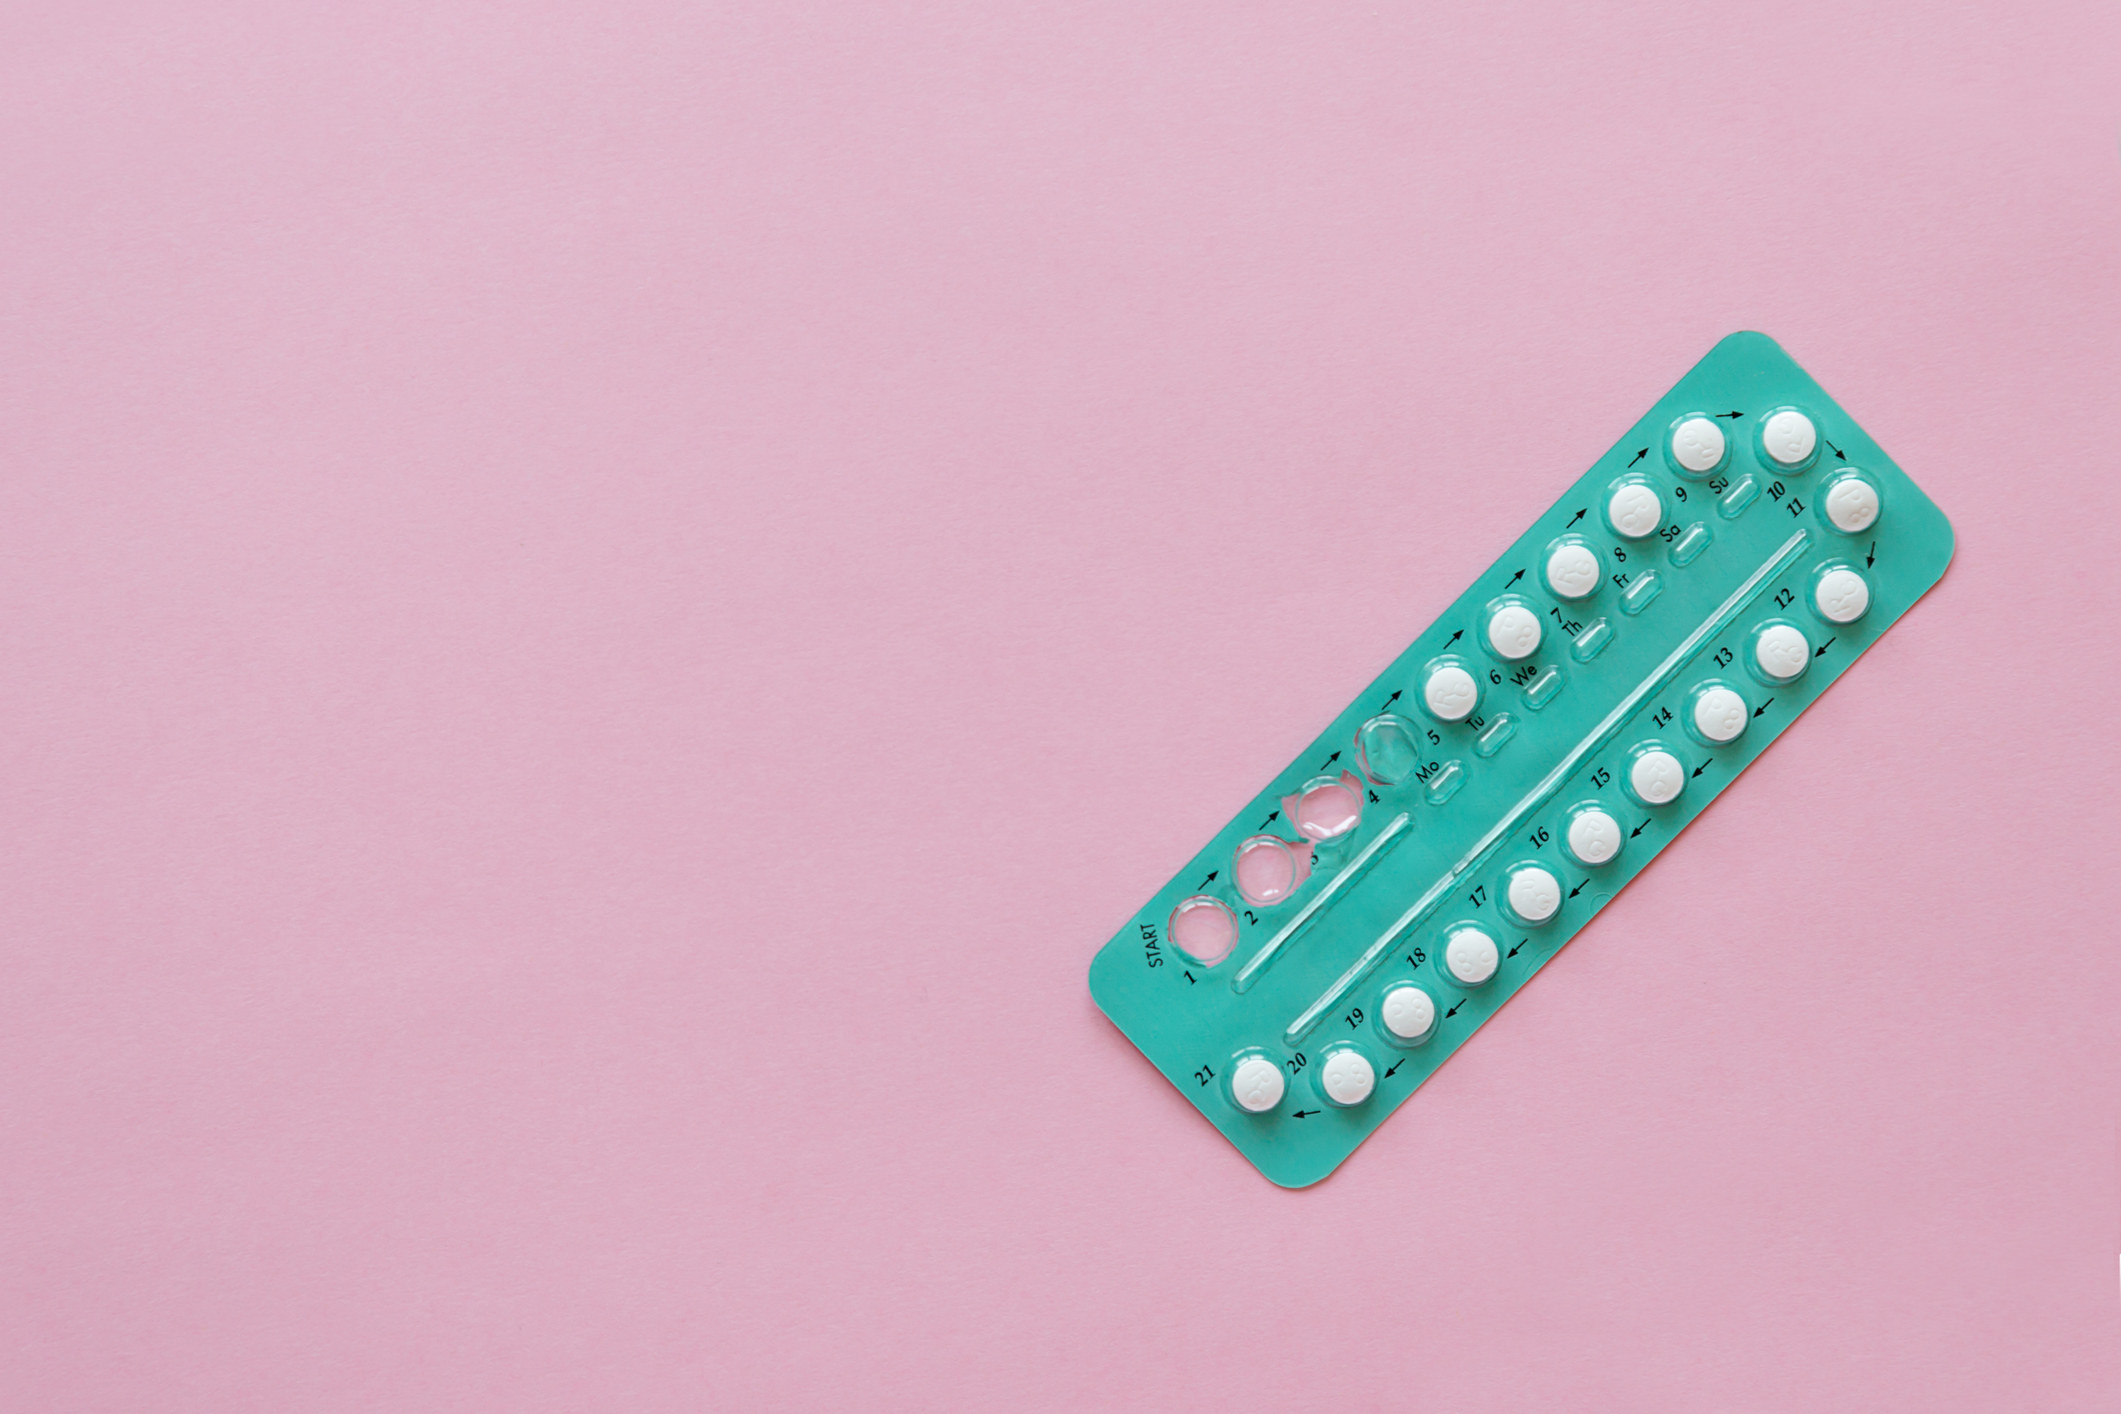 Stock image of birth control oral contraceptives in a green pack on a pink background